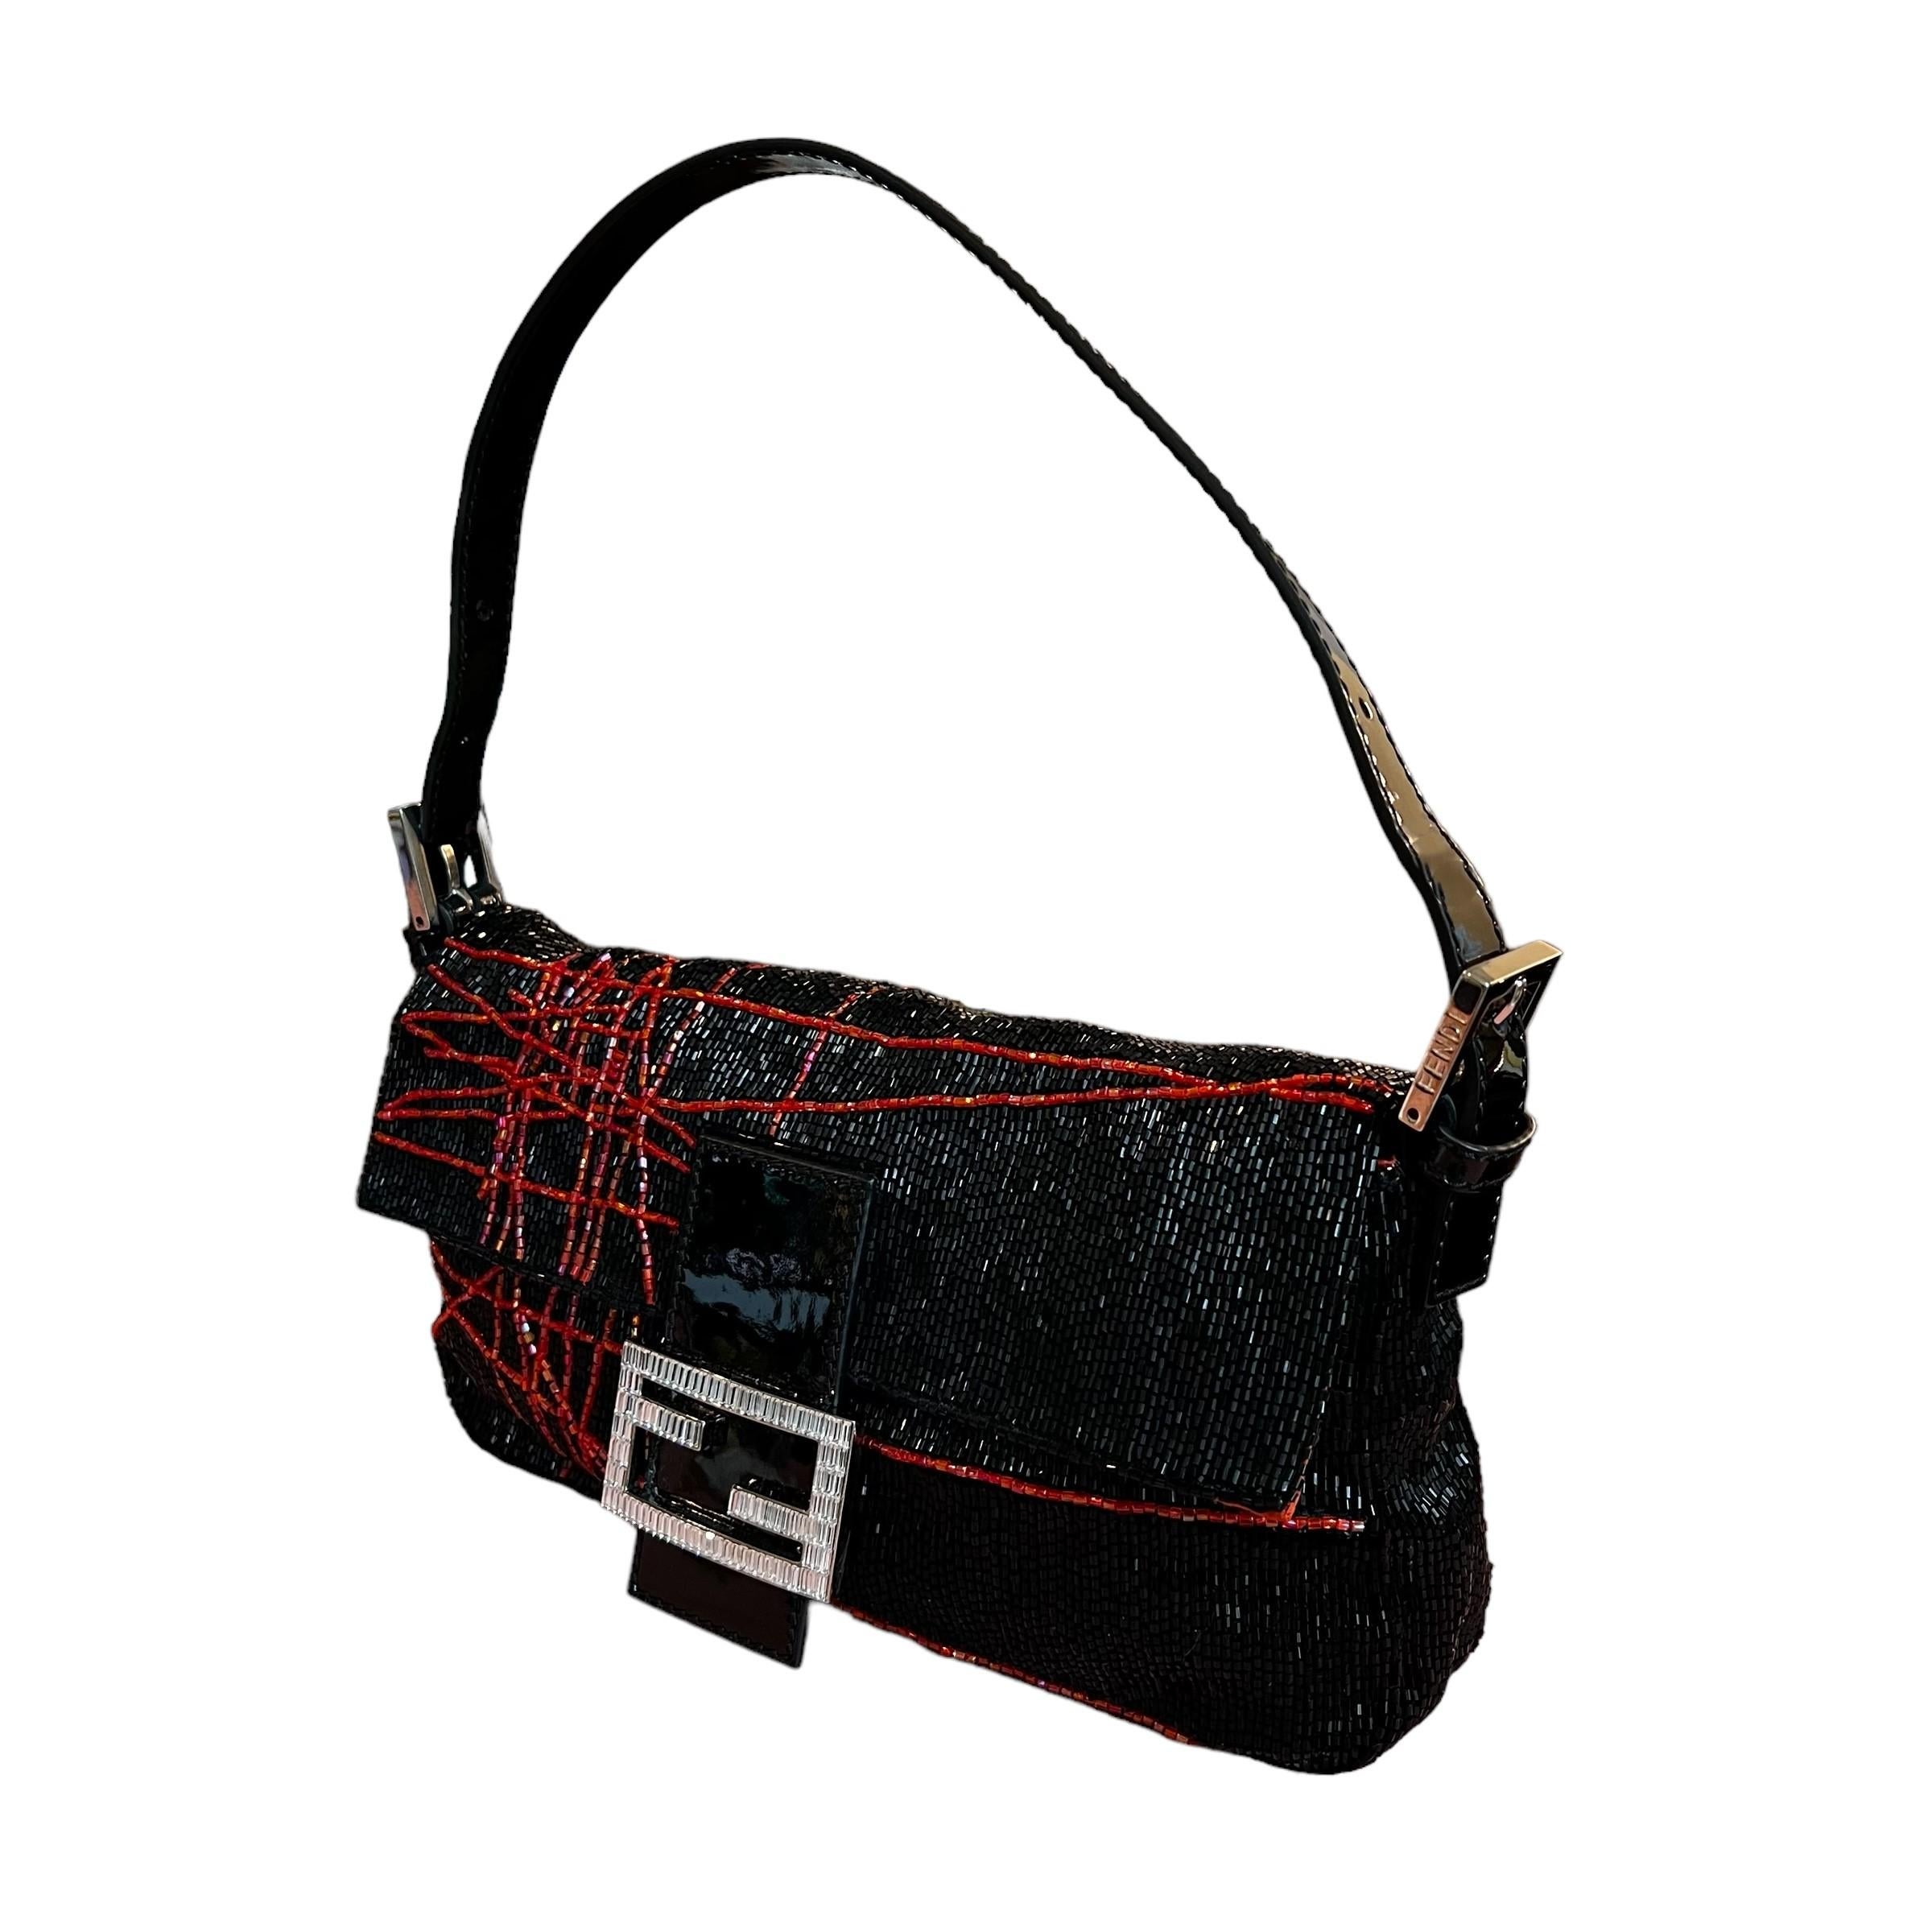 Rare Beaded Fendi Baguette Bag With Patent Leather & Swarovski Crystals For Sale 4